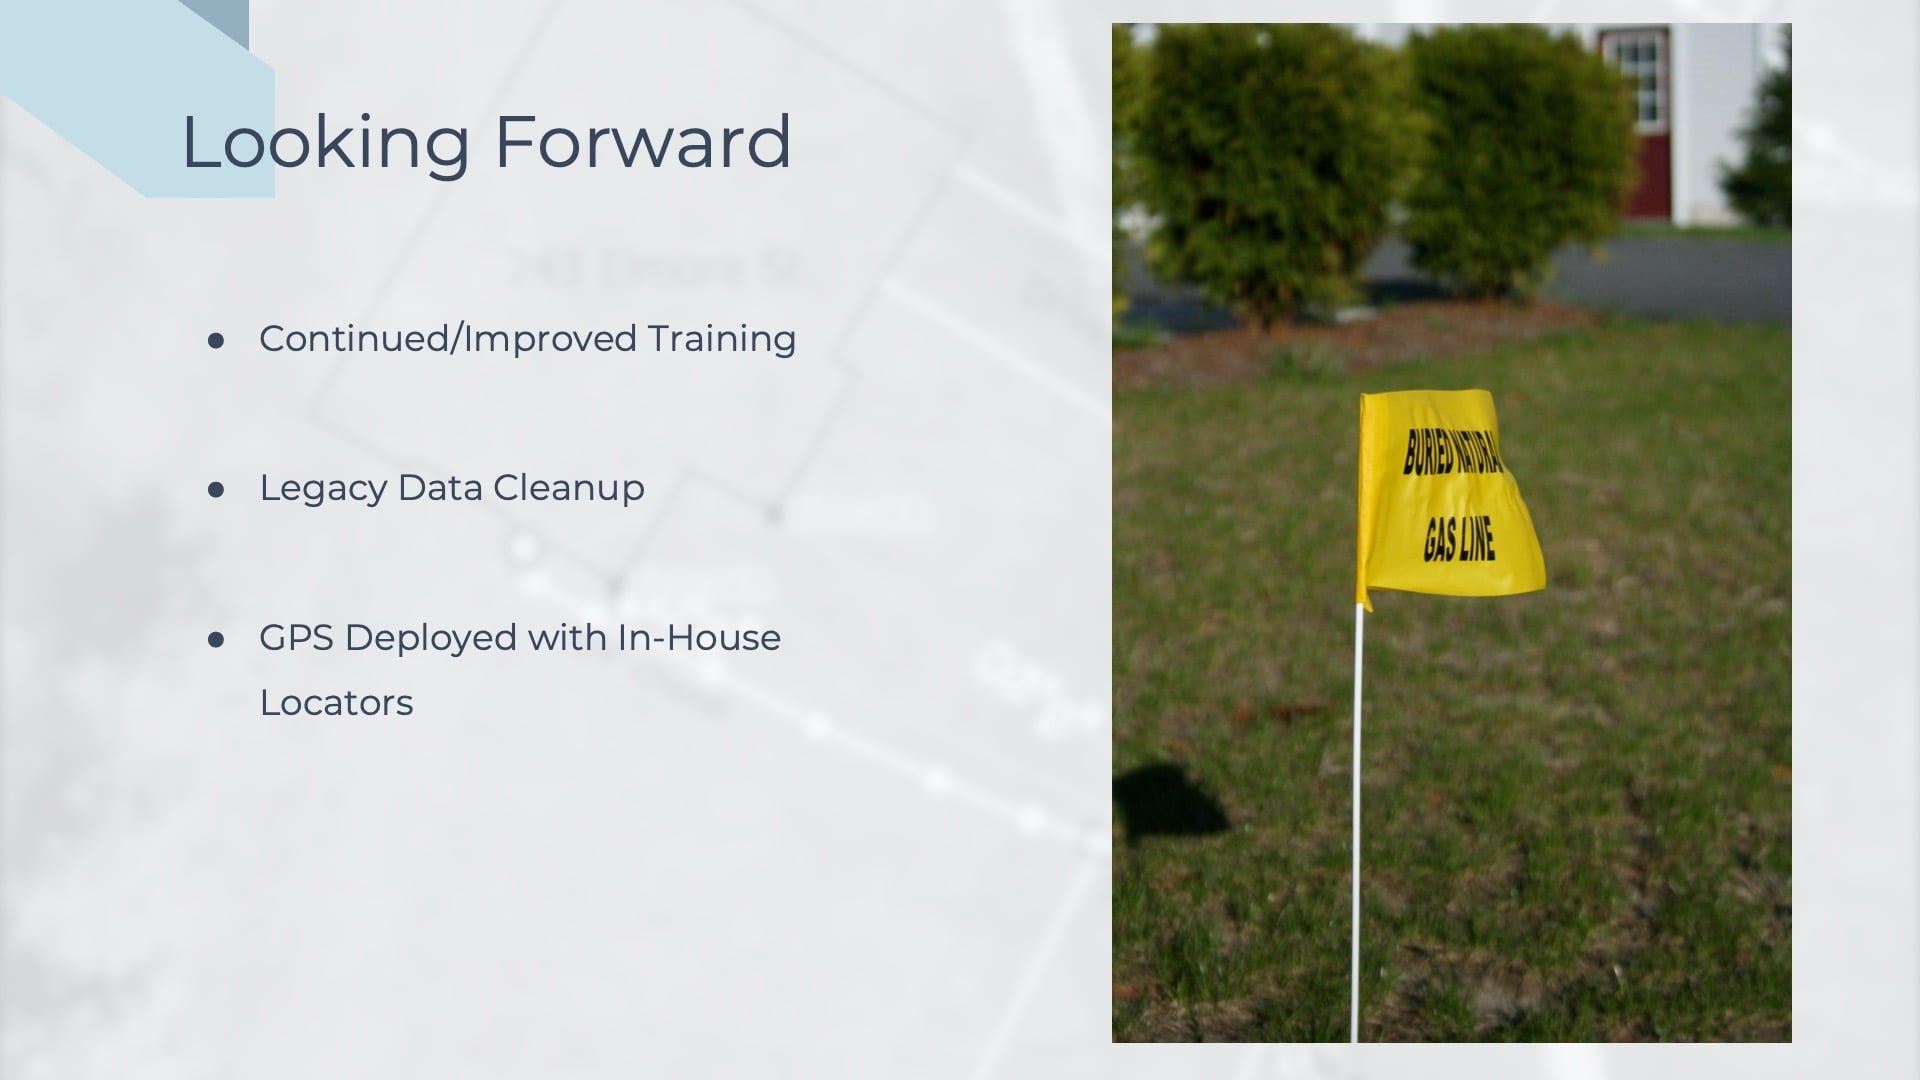 In the section "Looking Forward," James shows a slide reviewing their plans for continued and improved training, legacy data cleanup, and GPS deployed with in-house locators. An image of a yellow flag saying "Buried Natural Gas Line" is displayed to the righthand side of the slide.